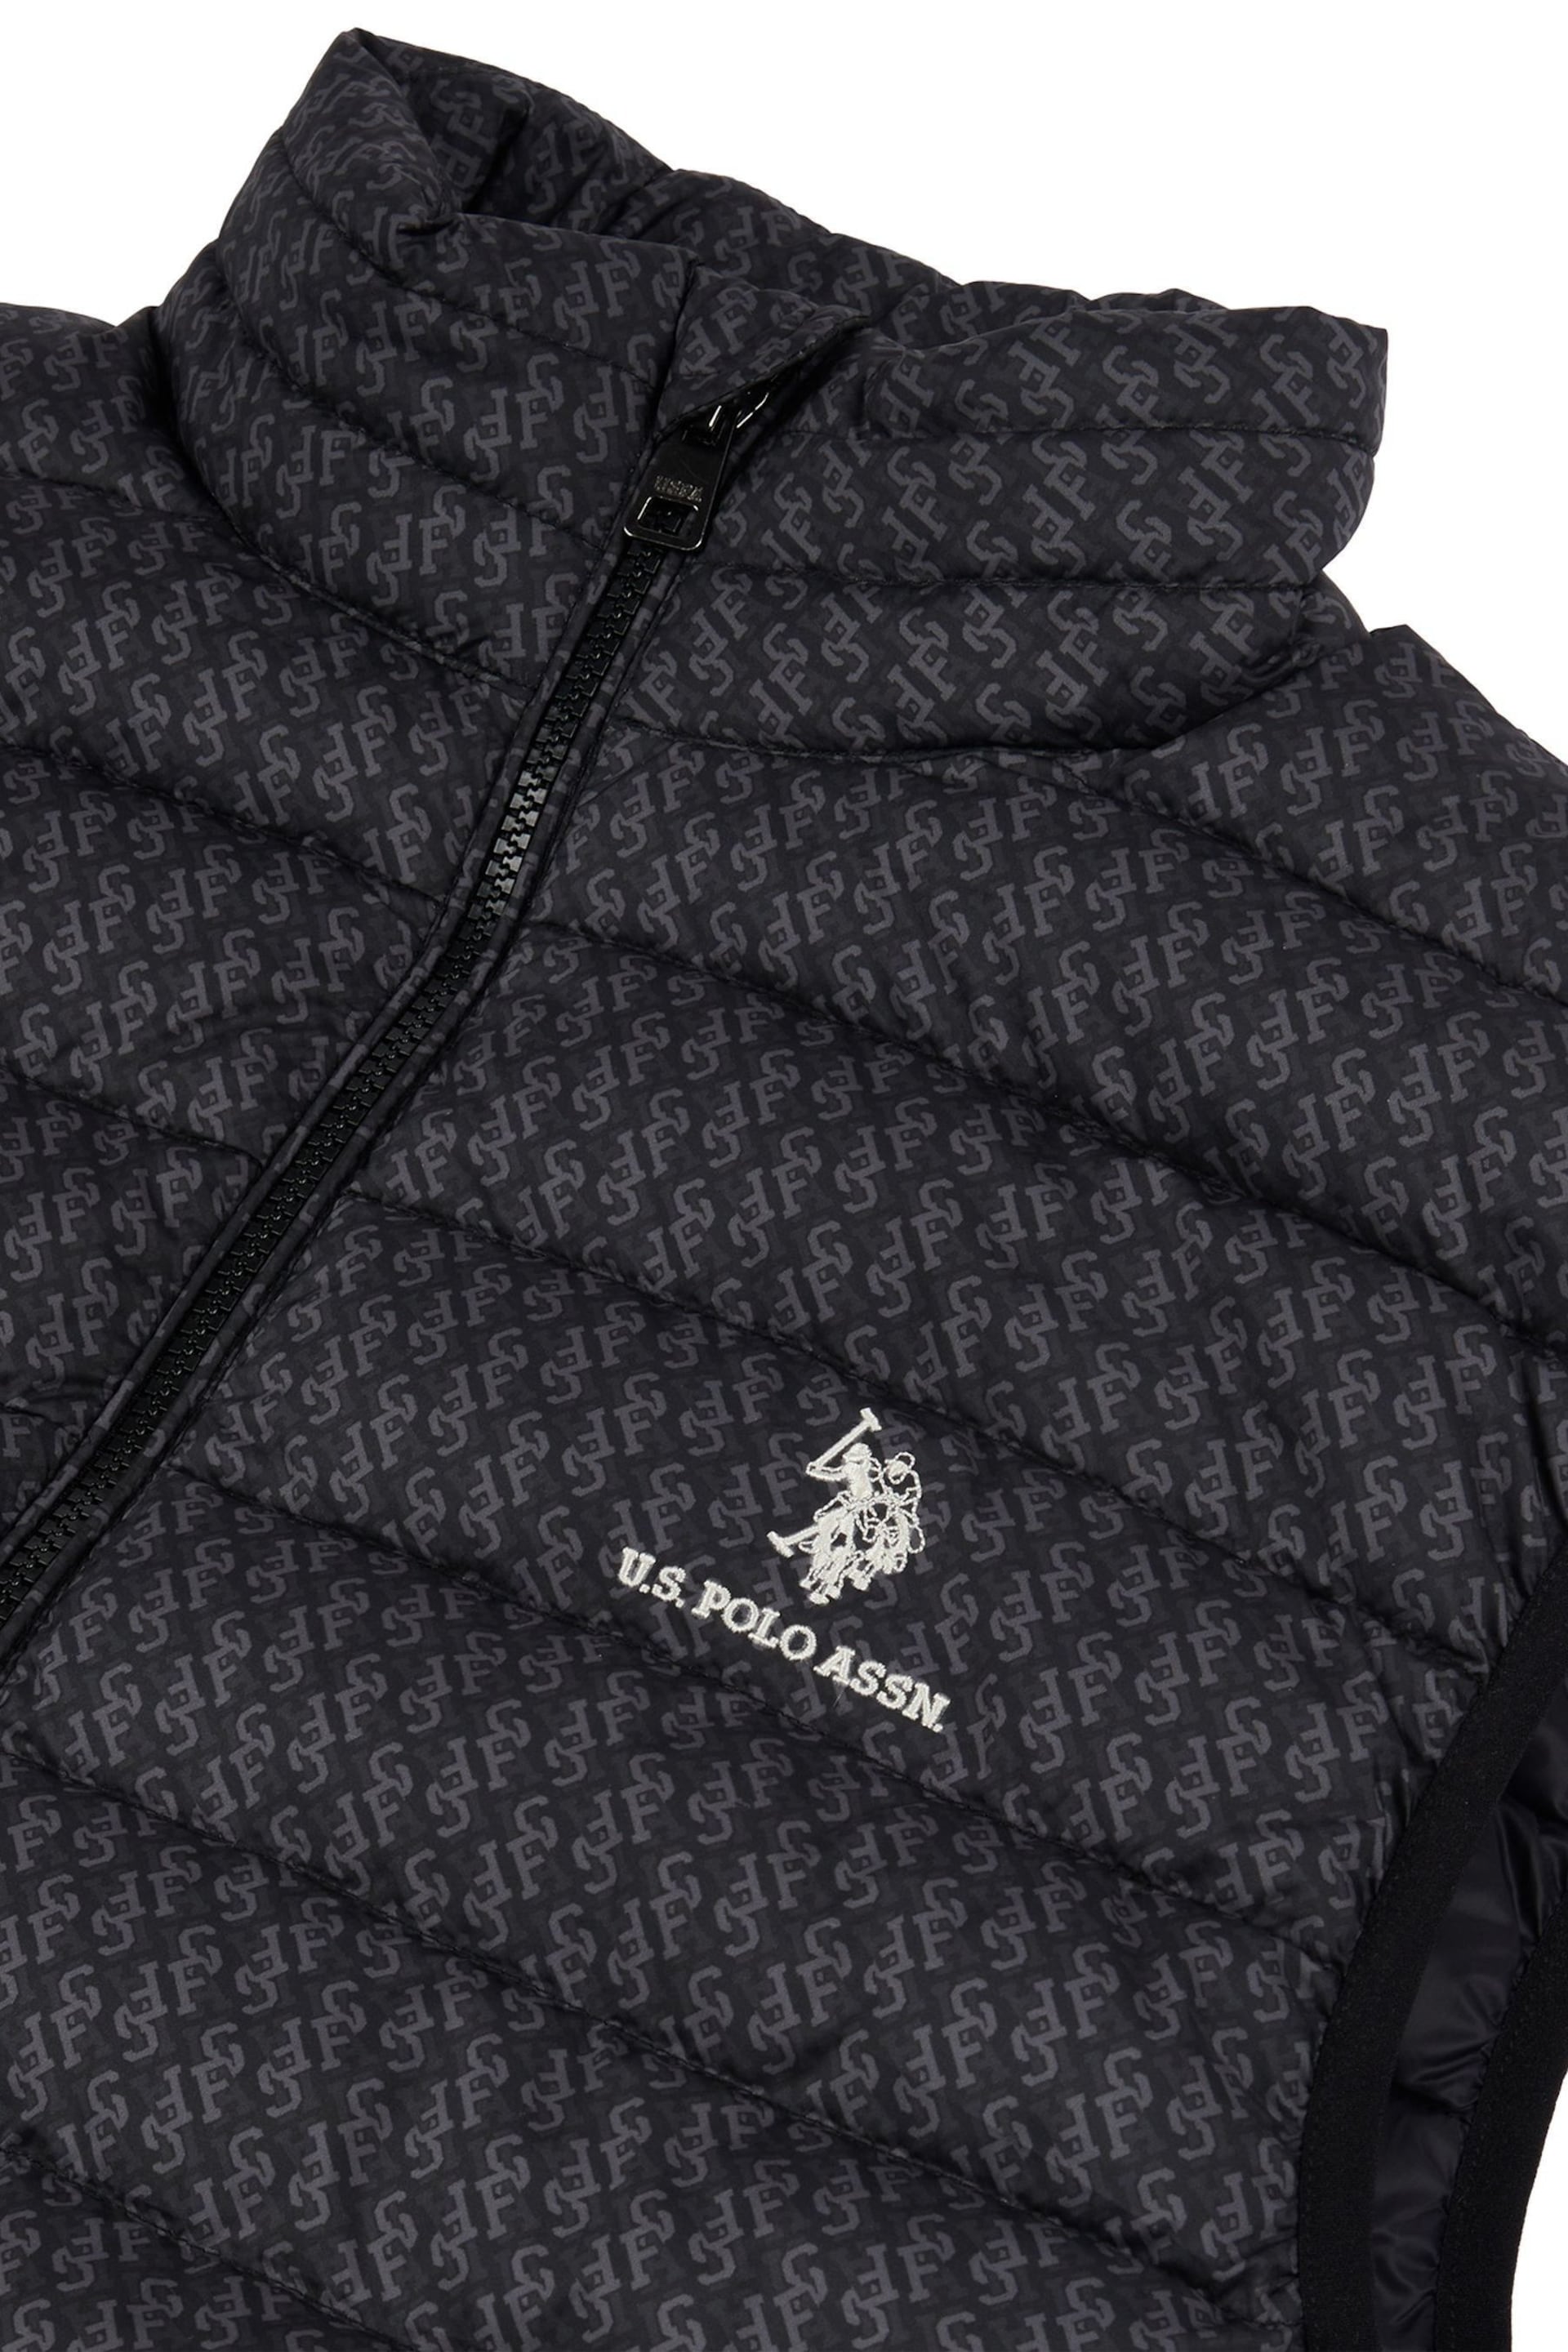 U.S. Polo Assn. Mens Monogram Quilted Black Gilet - Image 7 of 7